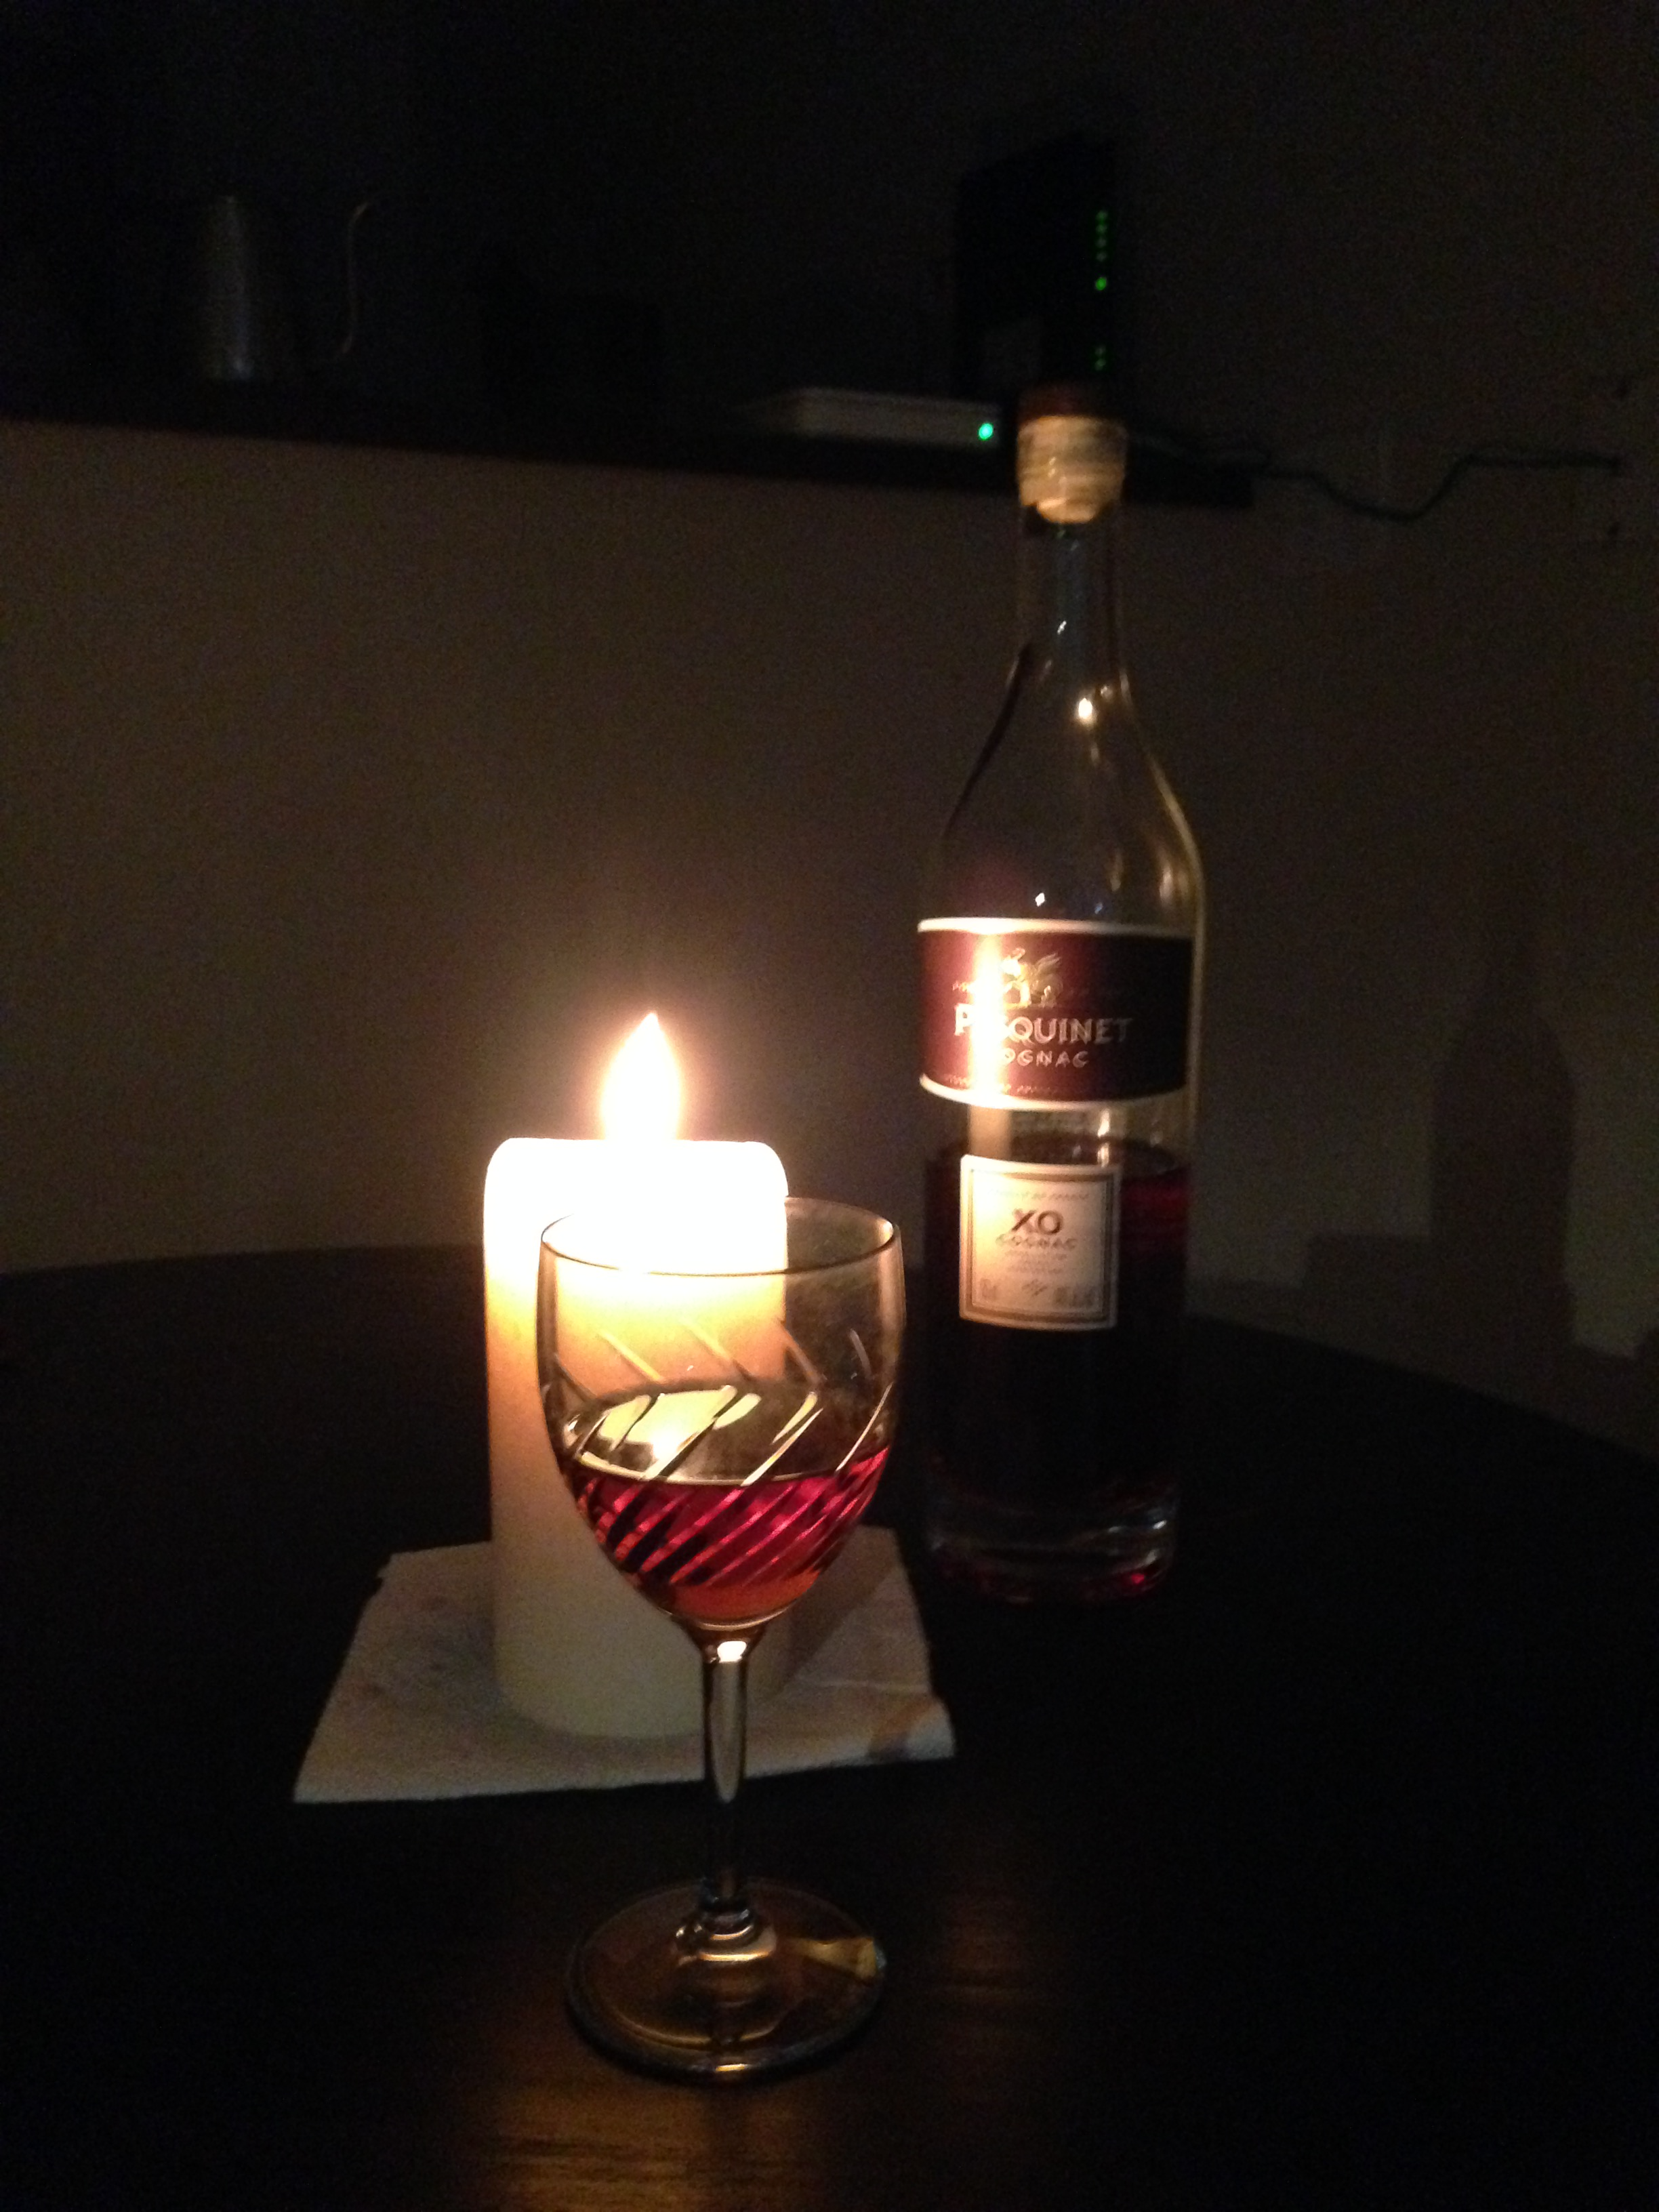 A bottle of Pasquinet, scented candle, and dry cheese.